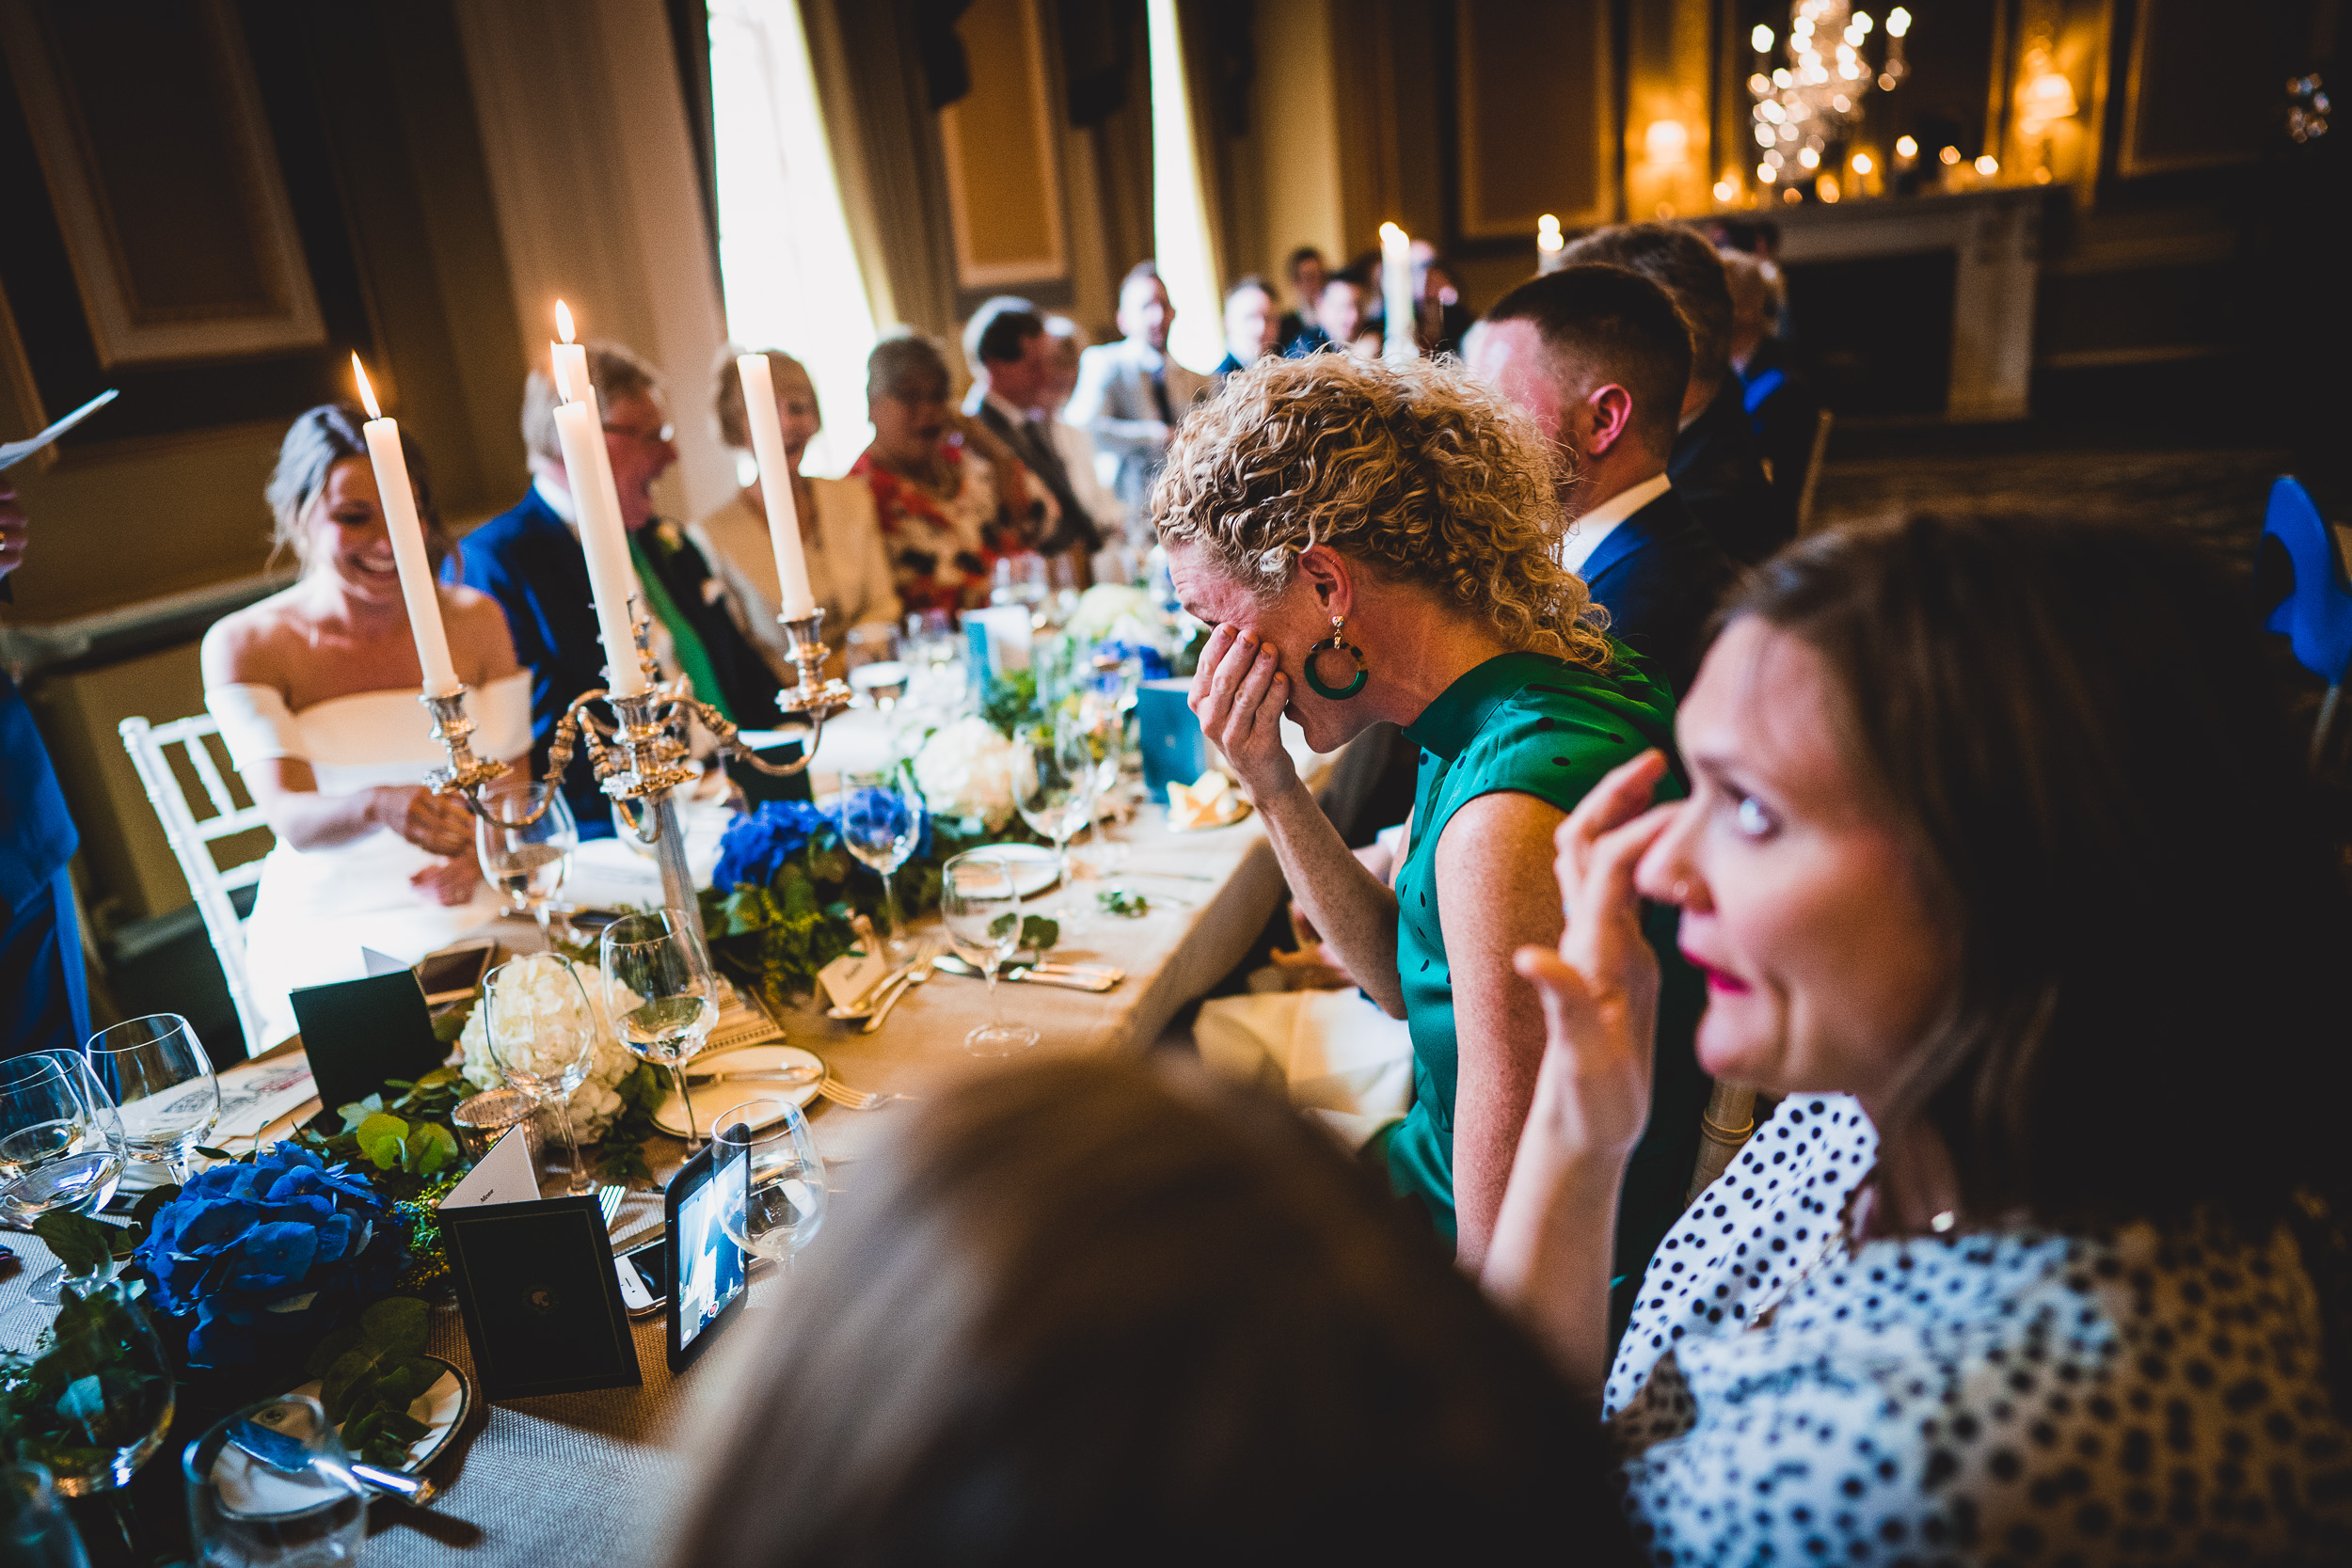 A group of people celebrating the wedding at a table.